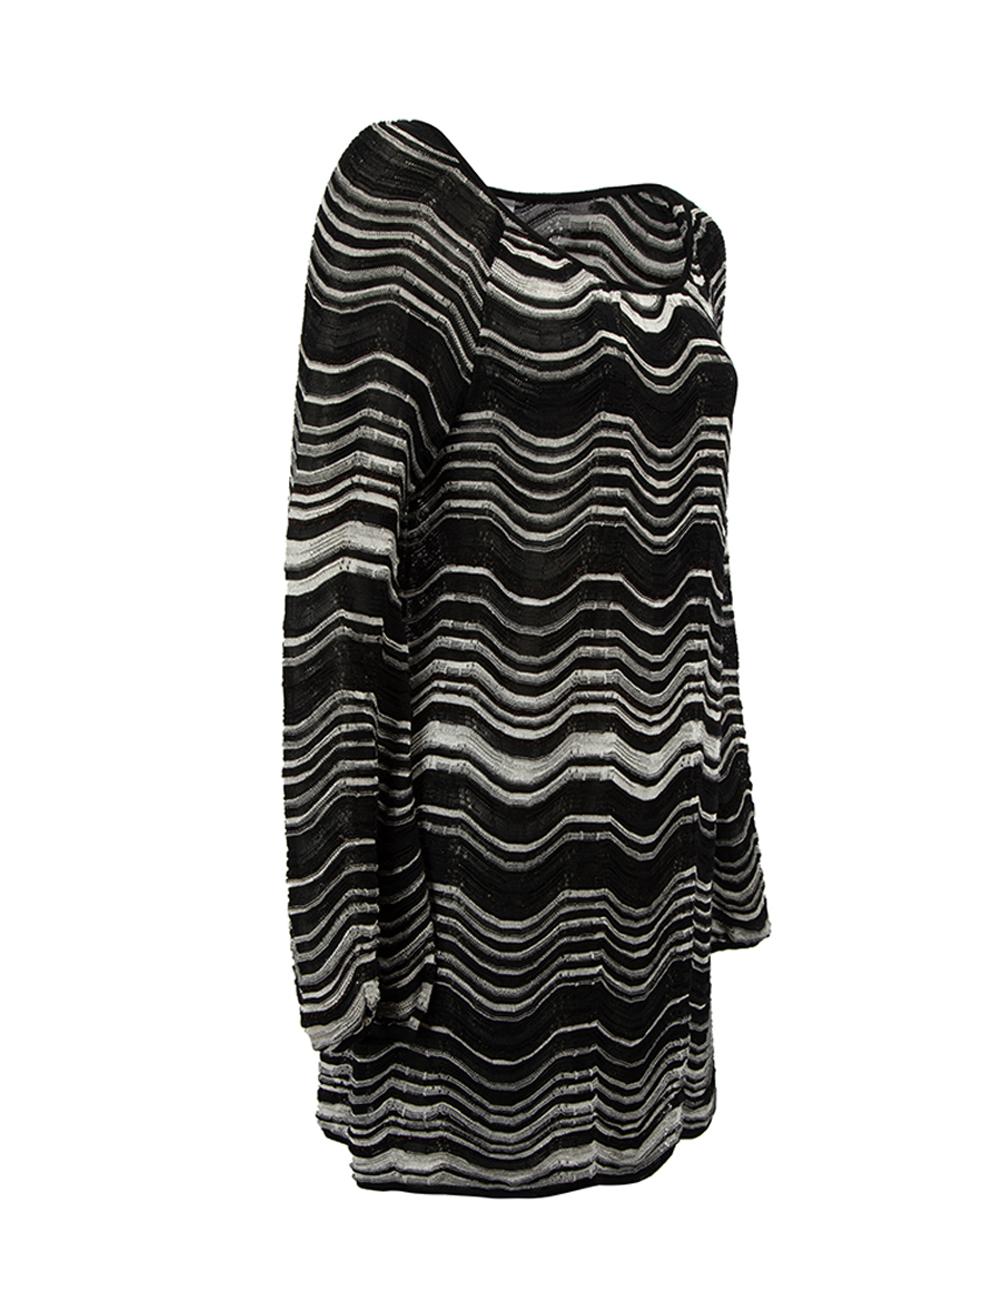 CONDITION is Very good. Hardly any visible wear to top is evident on this used M Missoni designer resale item.

Details
Black
Cotton
Long sleeves tunic top
Wavy stripe pattern
Round neckline
Made in Tunisia
Composition
51% Cotton, 36% Viscose, 6%